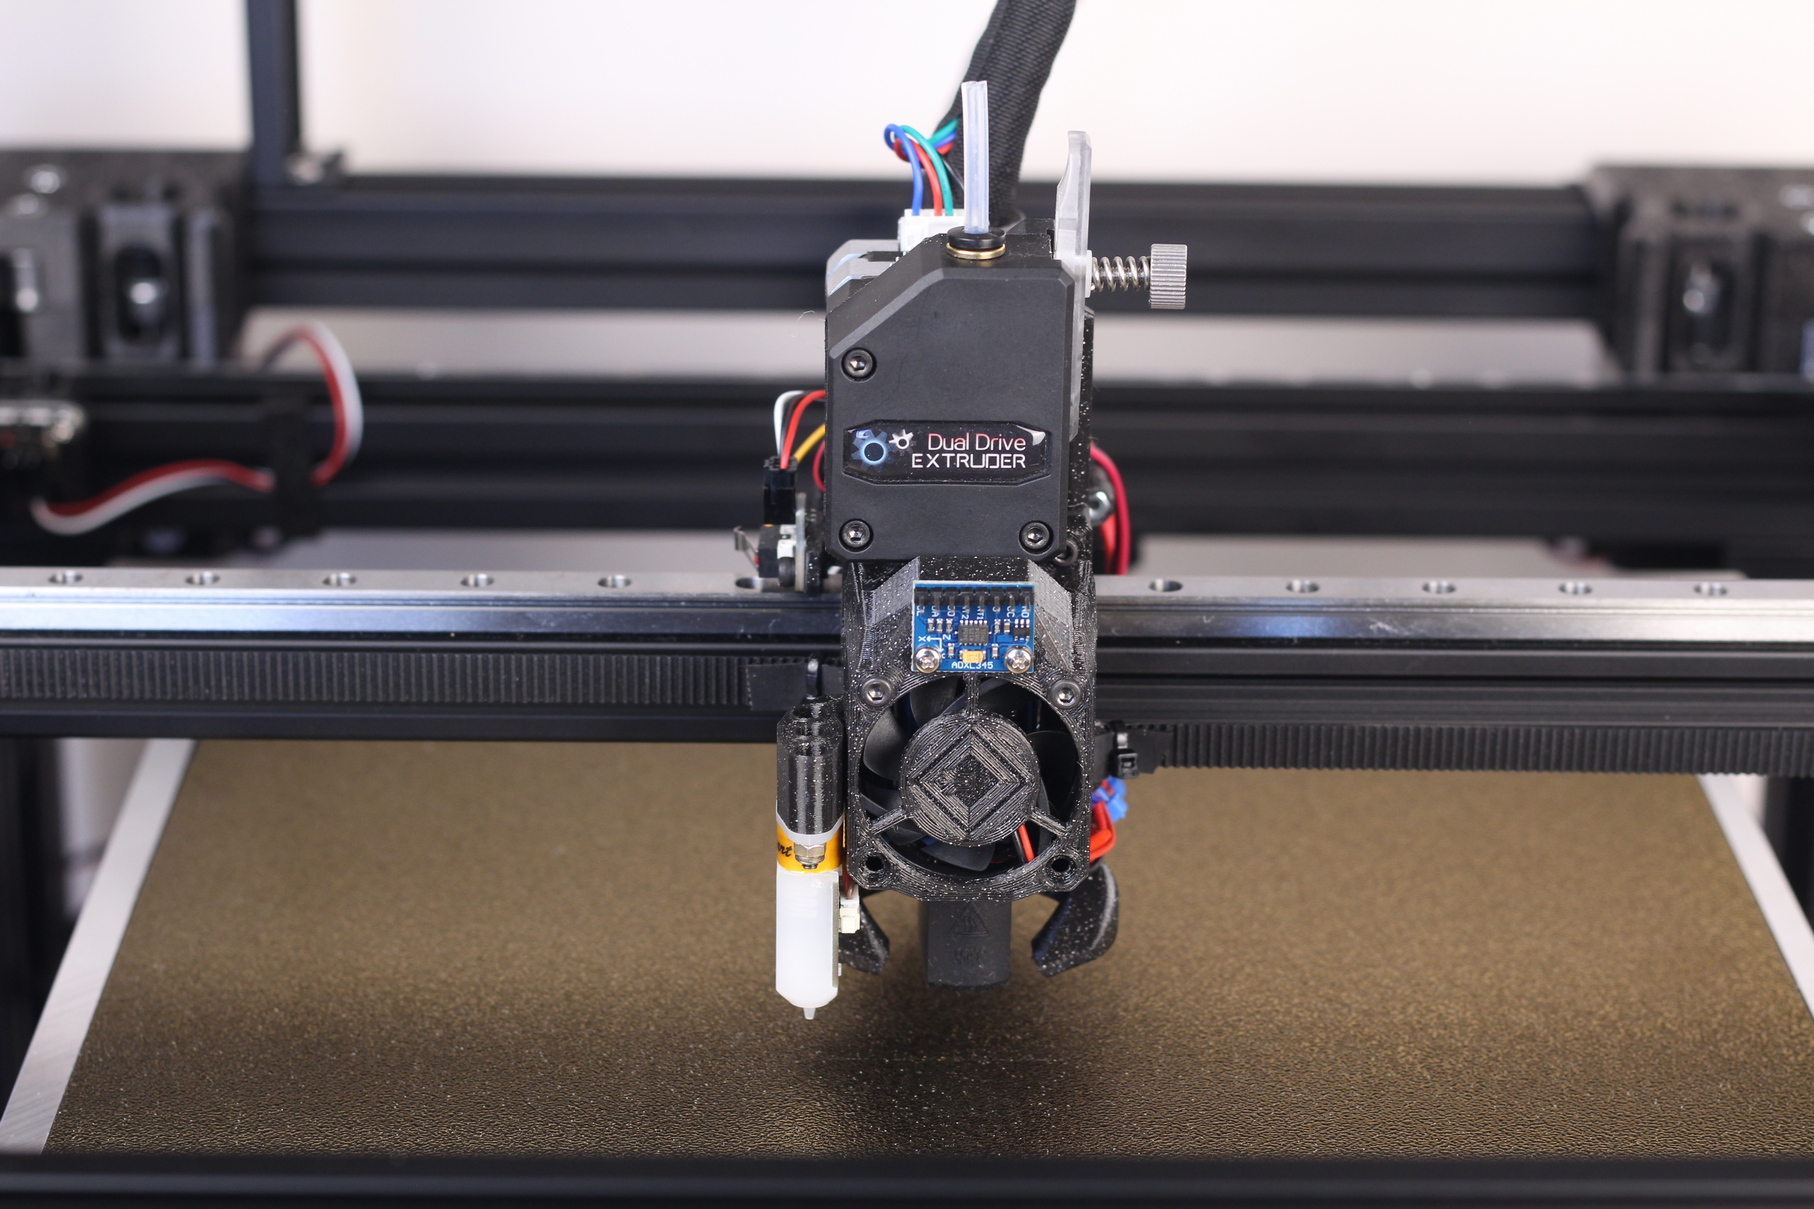 RatRig V Core 3 EVA mount with BMG and Dragonfly HIC 3 | RatRig V-Core 3 Review: Premium CoreXY 3D Printer Kit